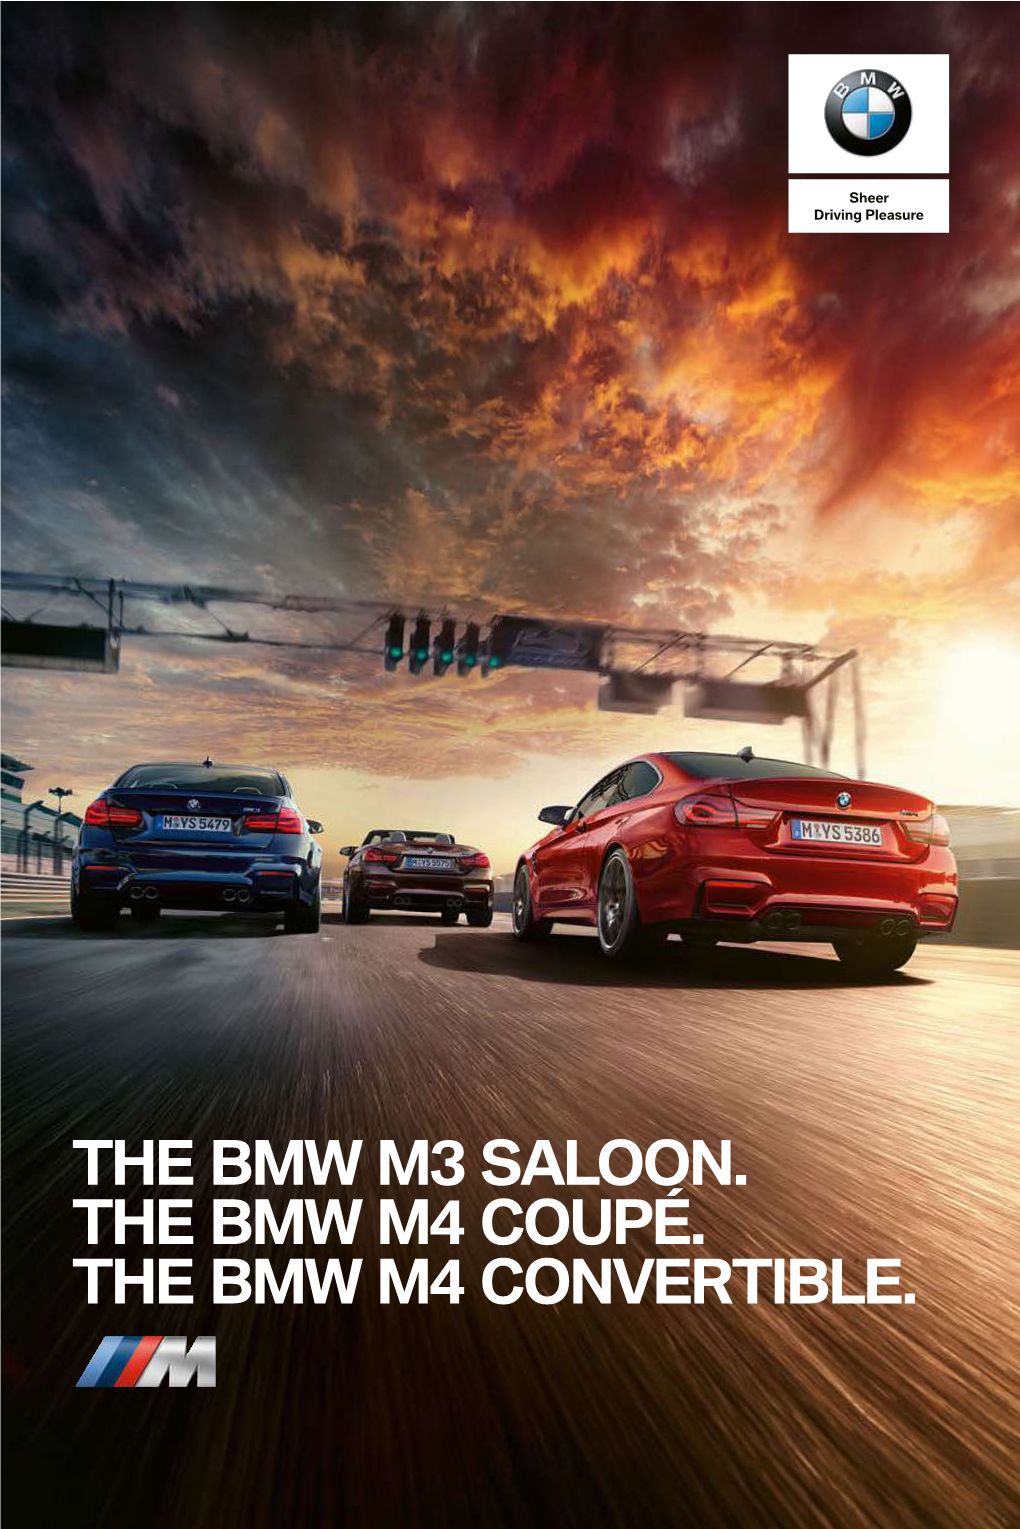 The Bmw M3 Saloon. the Bmw M4 Coupé. the Bmw M4 Convertible